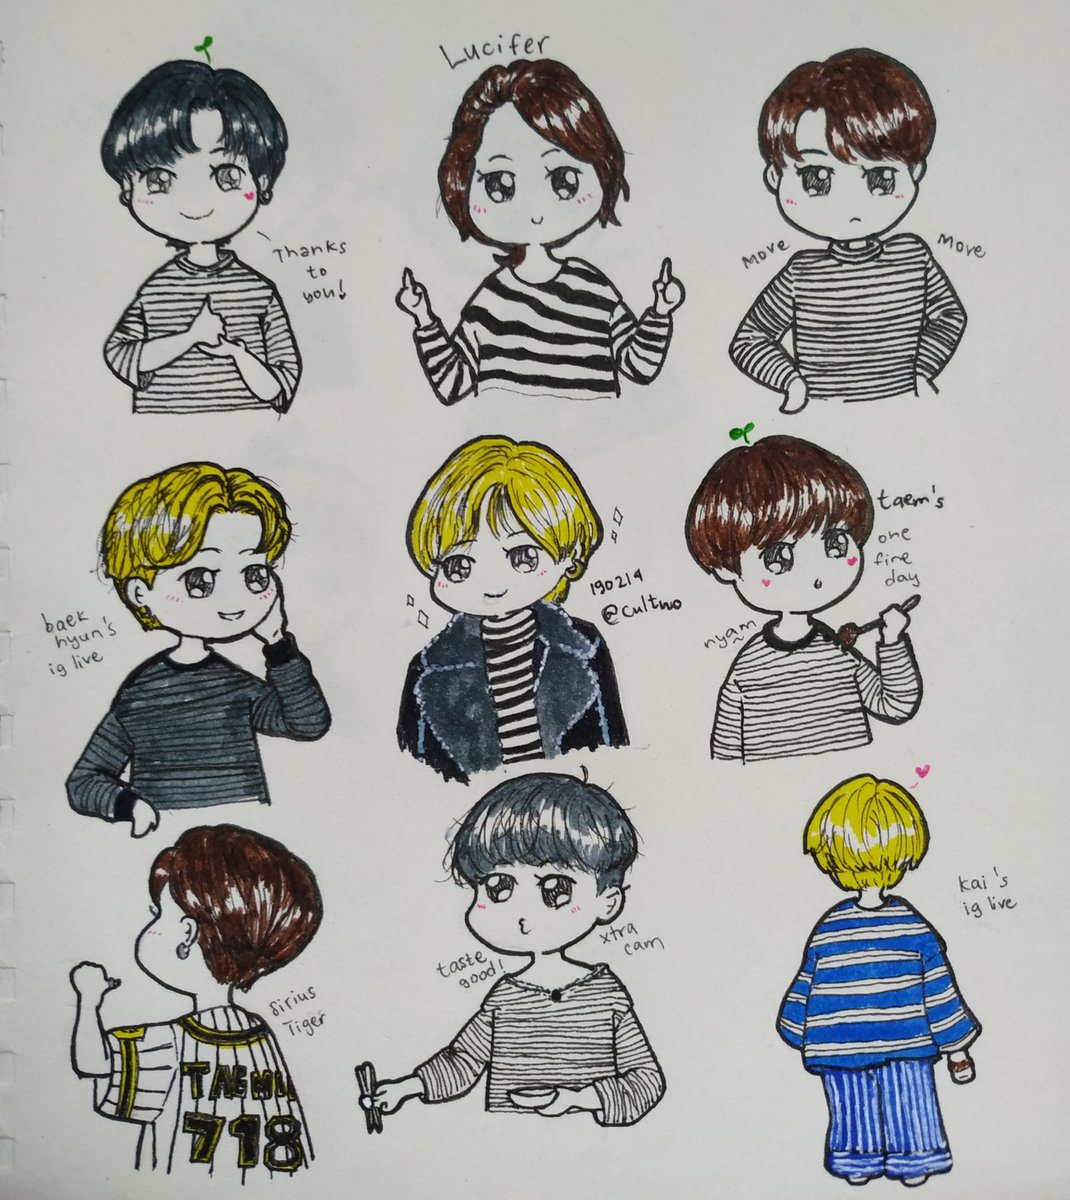 SM: the name of your concert is 'Never Gonna Dance Again'6v6: okSM: you can Never Wear Striped Shirts Again6v6:  #SHINee  #태민  #TAEMIN  #テミン